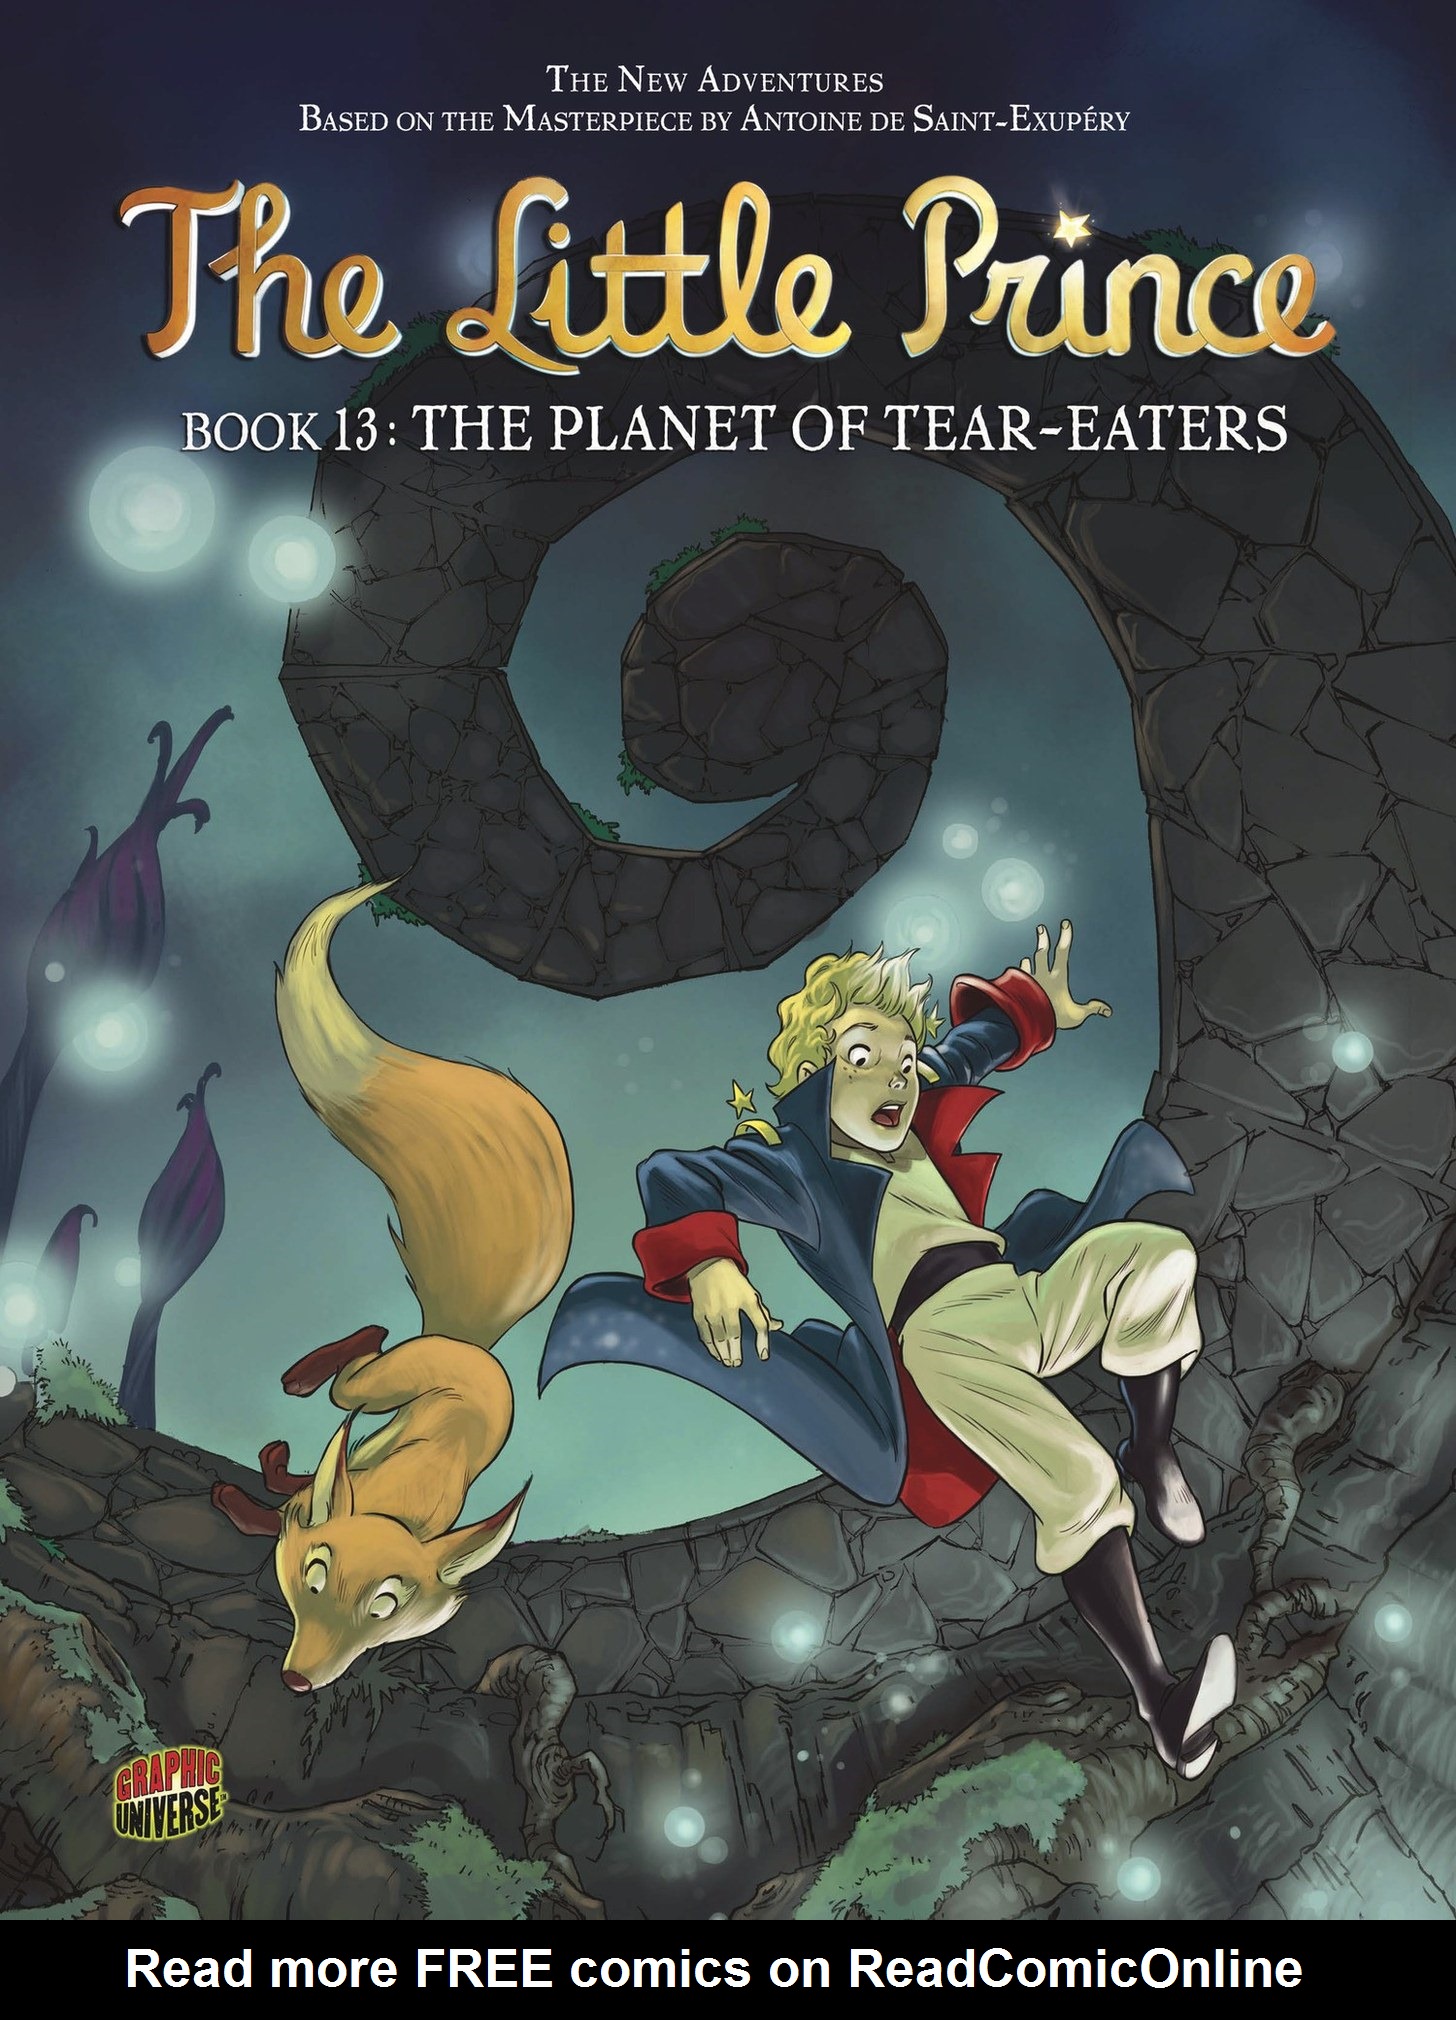 The Little Prince Issue 13 | Read The Little Prince Issue 13 comic online  in high quality. Read Full Comic online for free - Read comics online in  high quality .|viewcomiconline.com